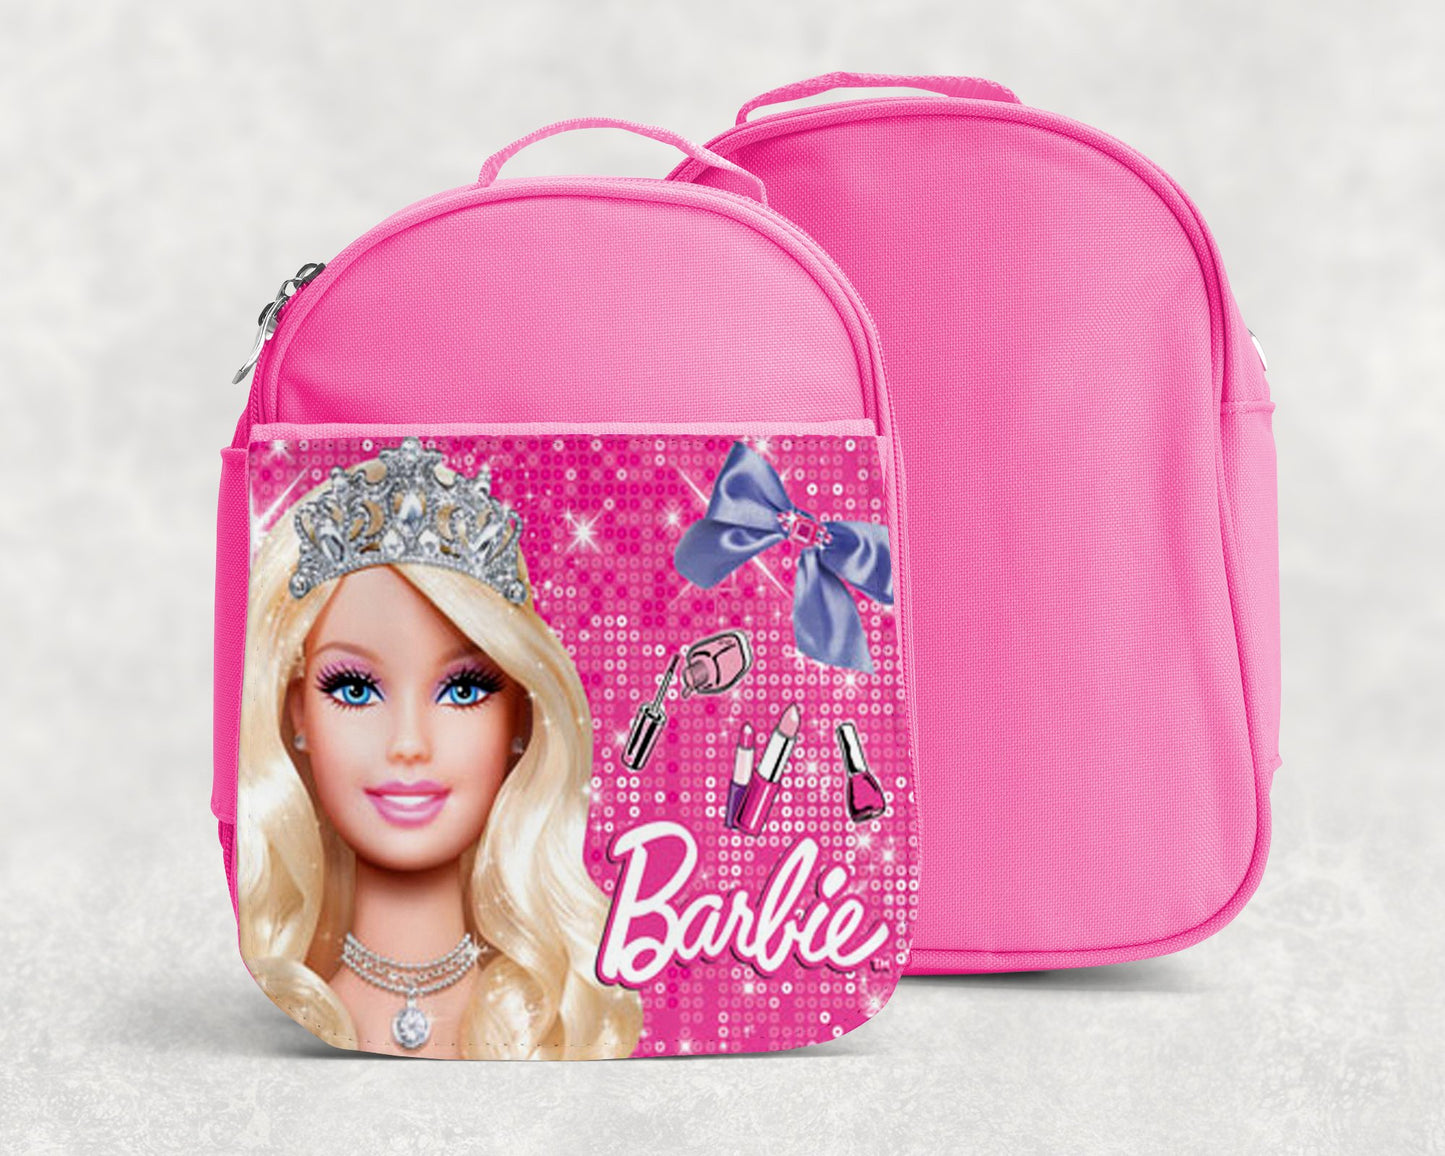 Barbie Lunch Tote